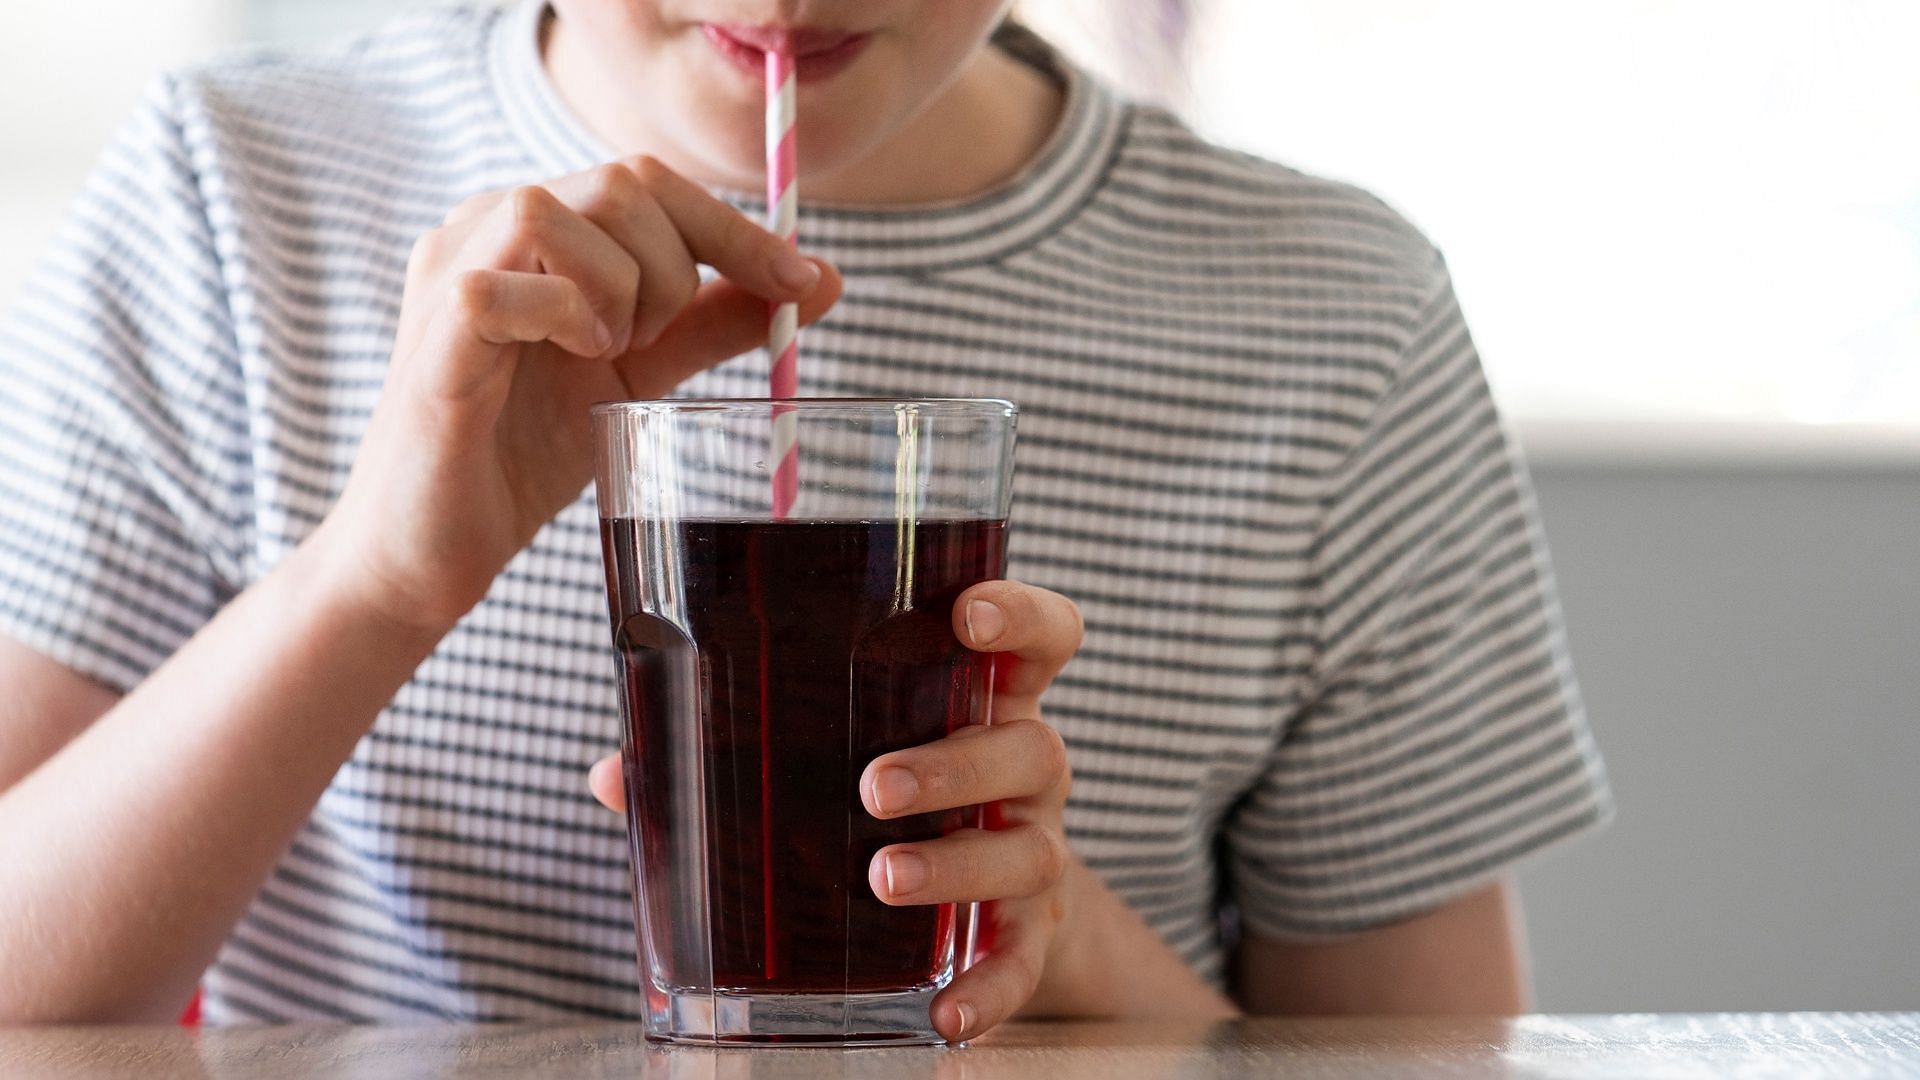 Aspartame is 200 times sweeter than regular sugar. (Photo via Getty Images)